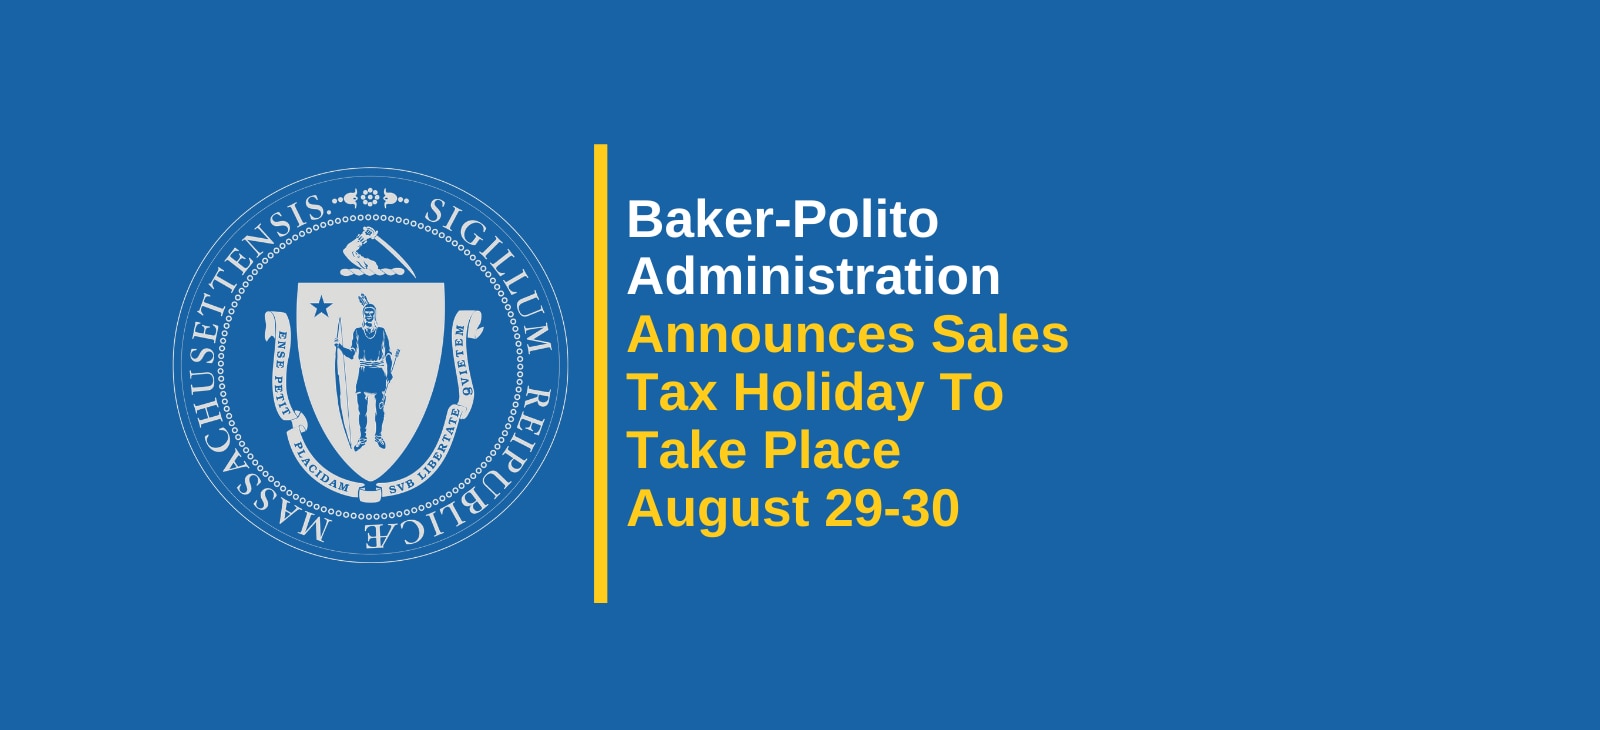 Baker-Polito Administration Announces Sales Tax Holiday To Take Place August 29-30